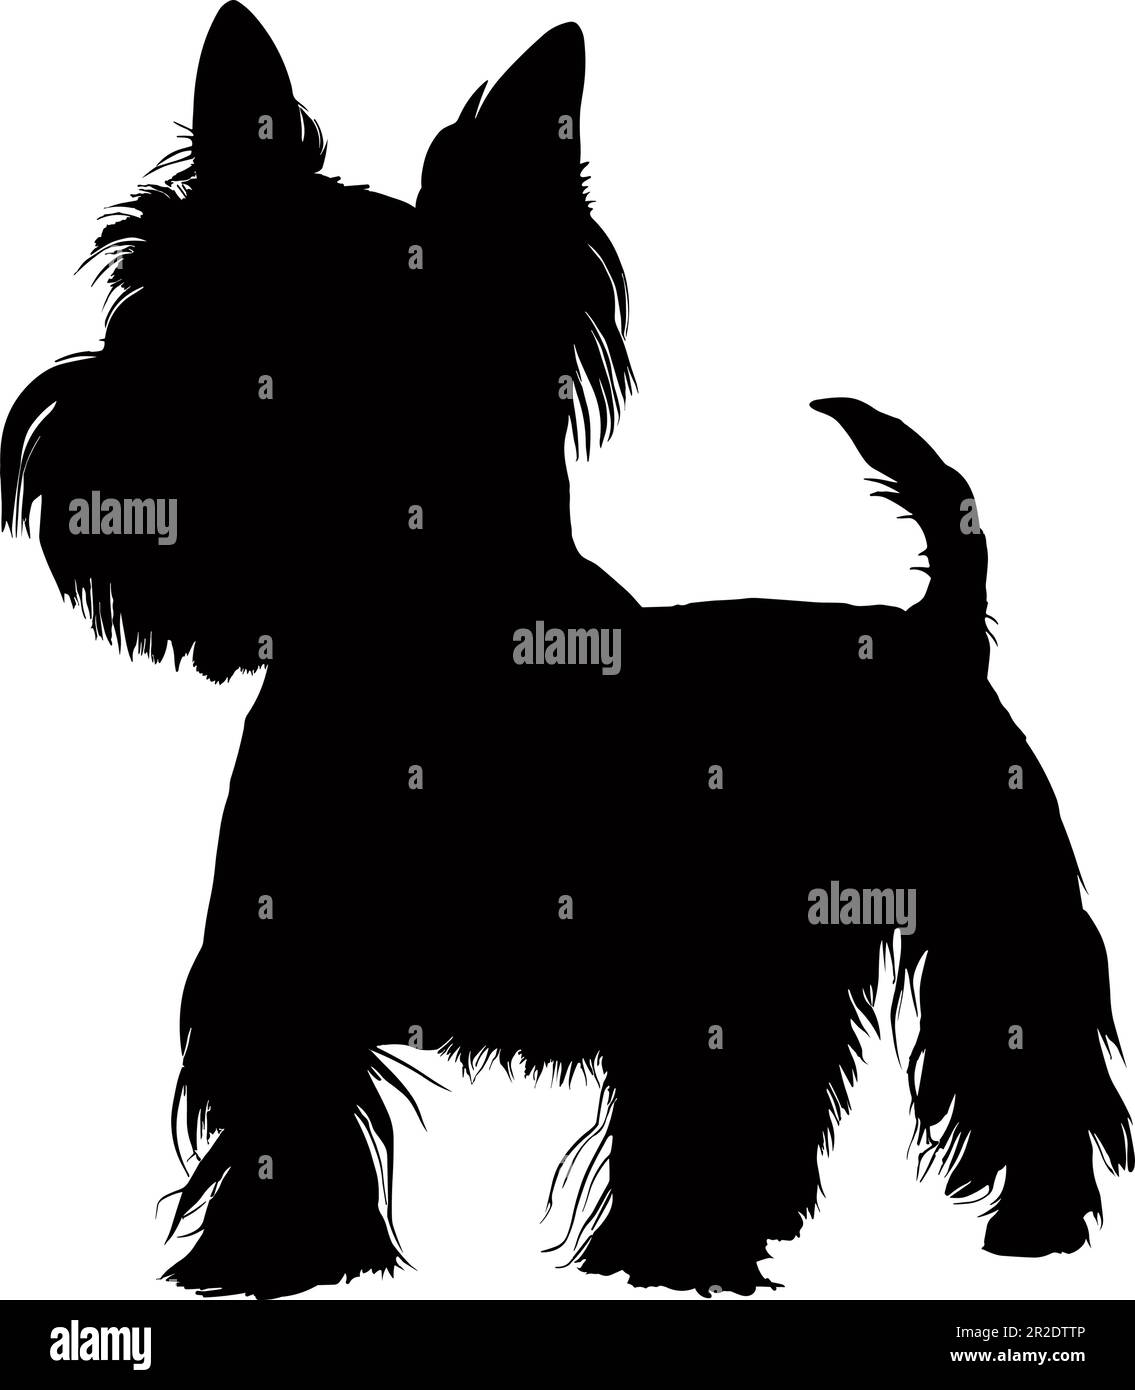 West highland Terrier dog silhouette isolated on a white background. Vector illustration Stock Vector